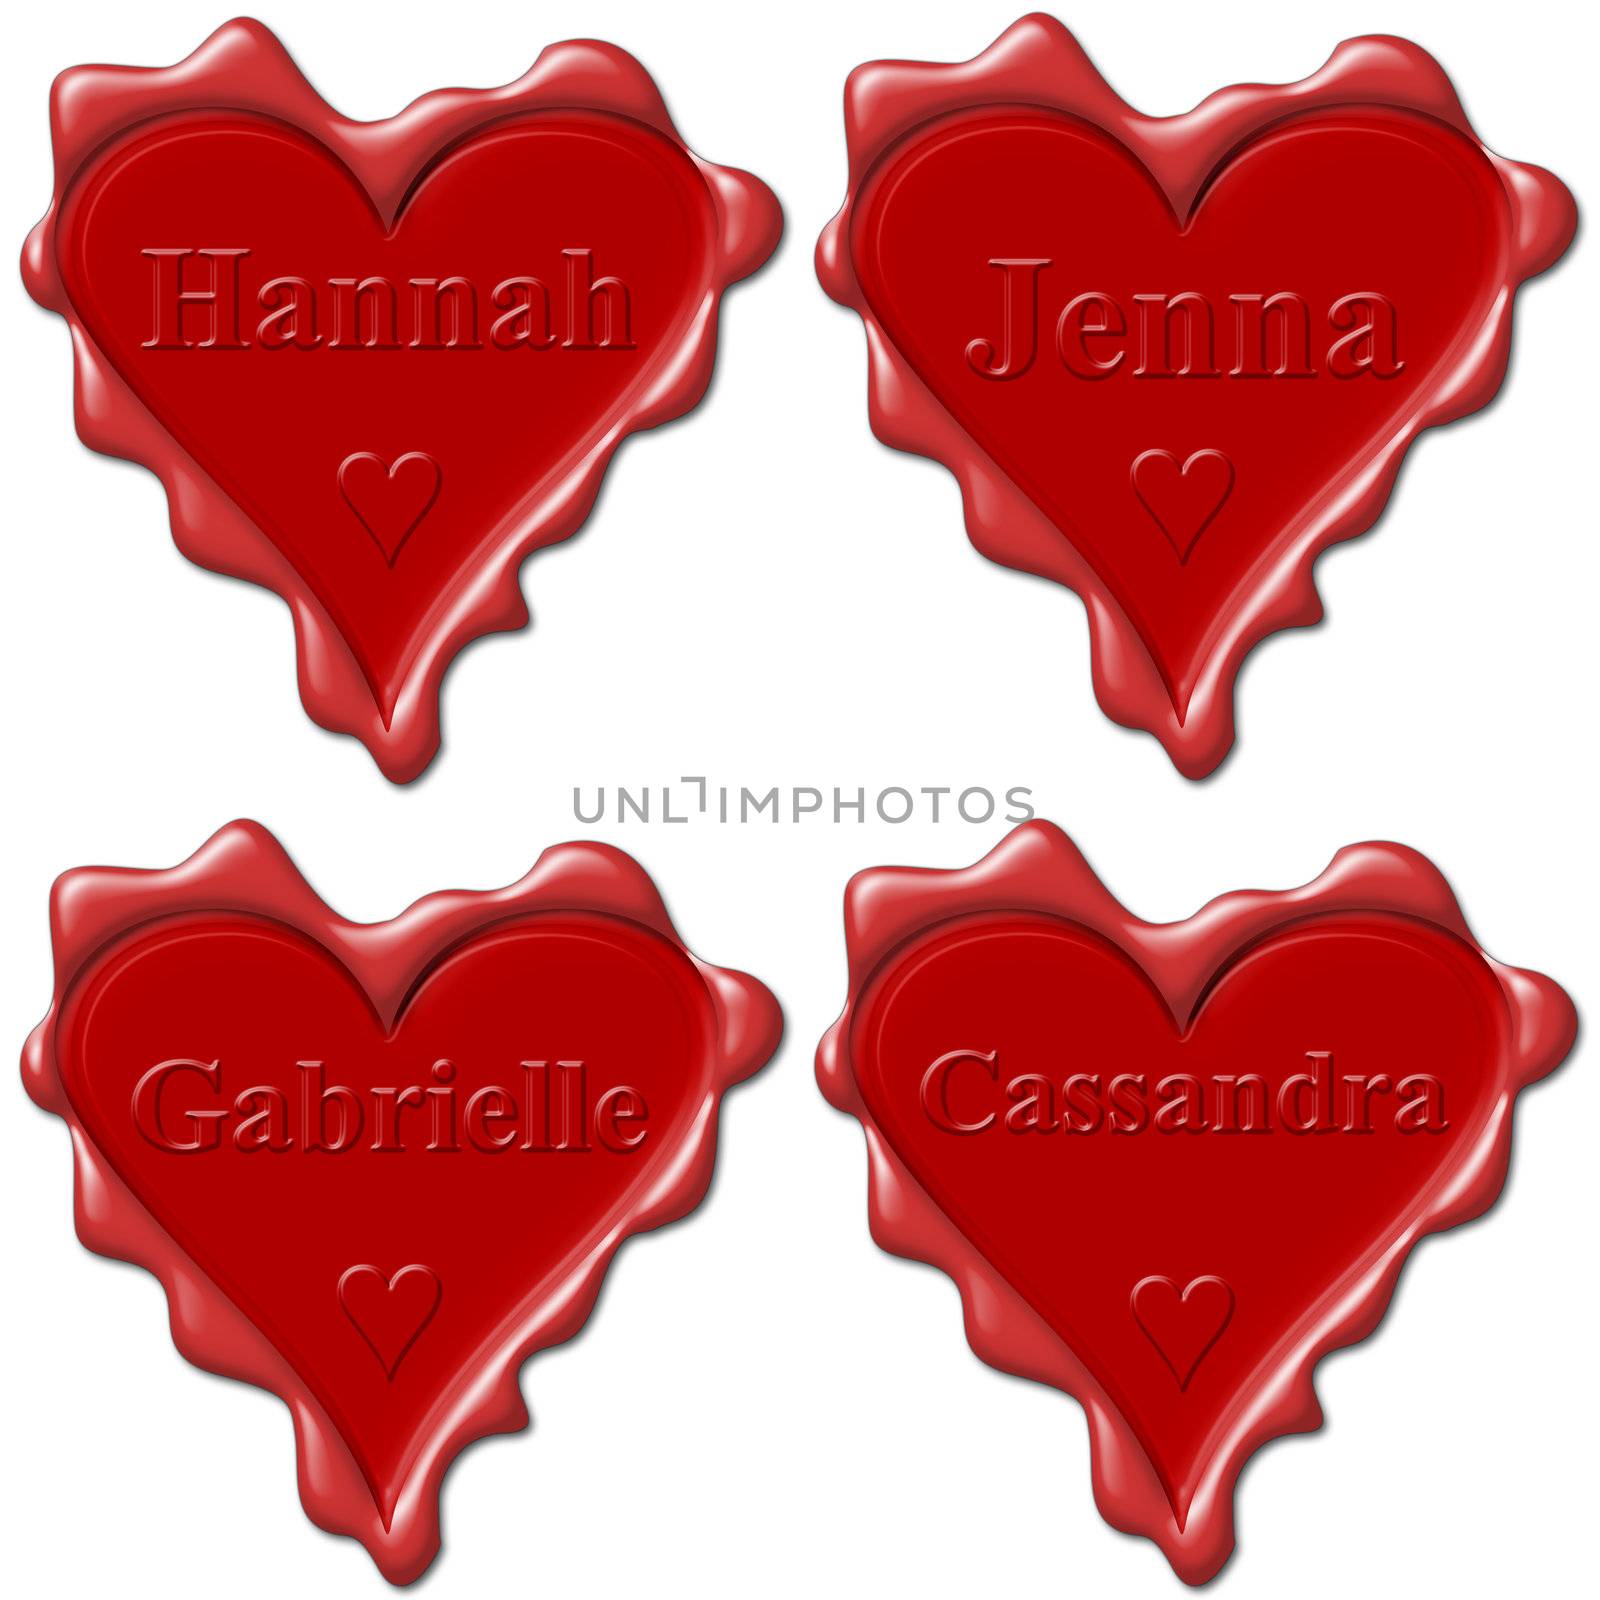 Valentine love hearts with names: Hannah, Jenna, Gabrielle, Cass by mozzyb